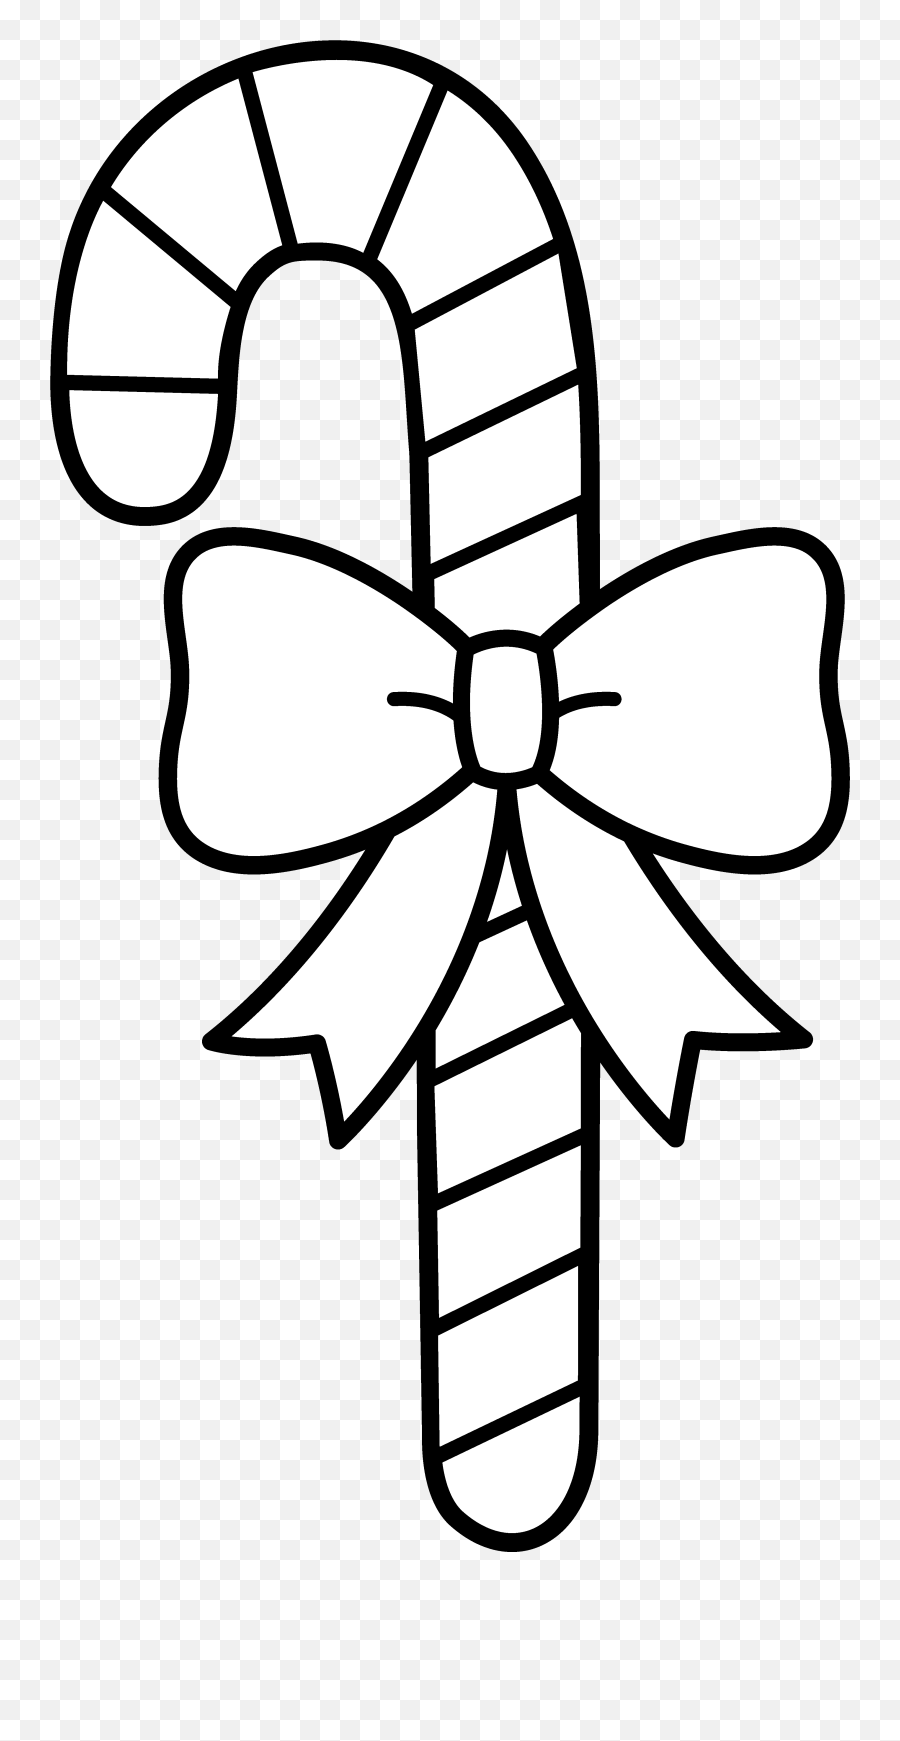 Clip Black And White Download Christmas Coloring Page - Candy Cane Clip Art Black And White Emoji,Candycane Emoji